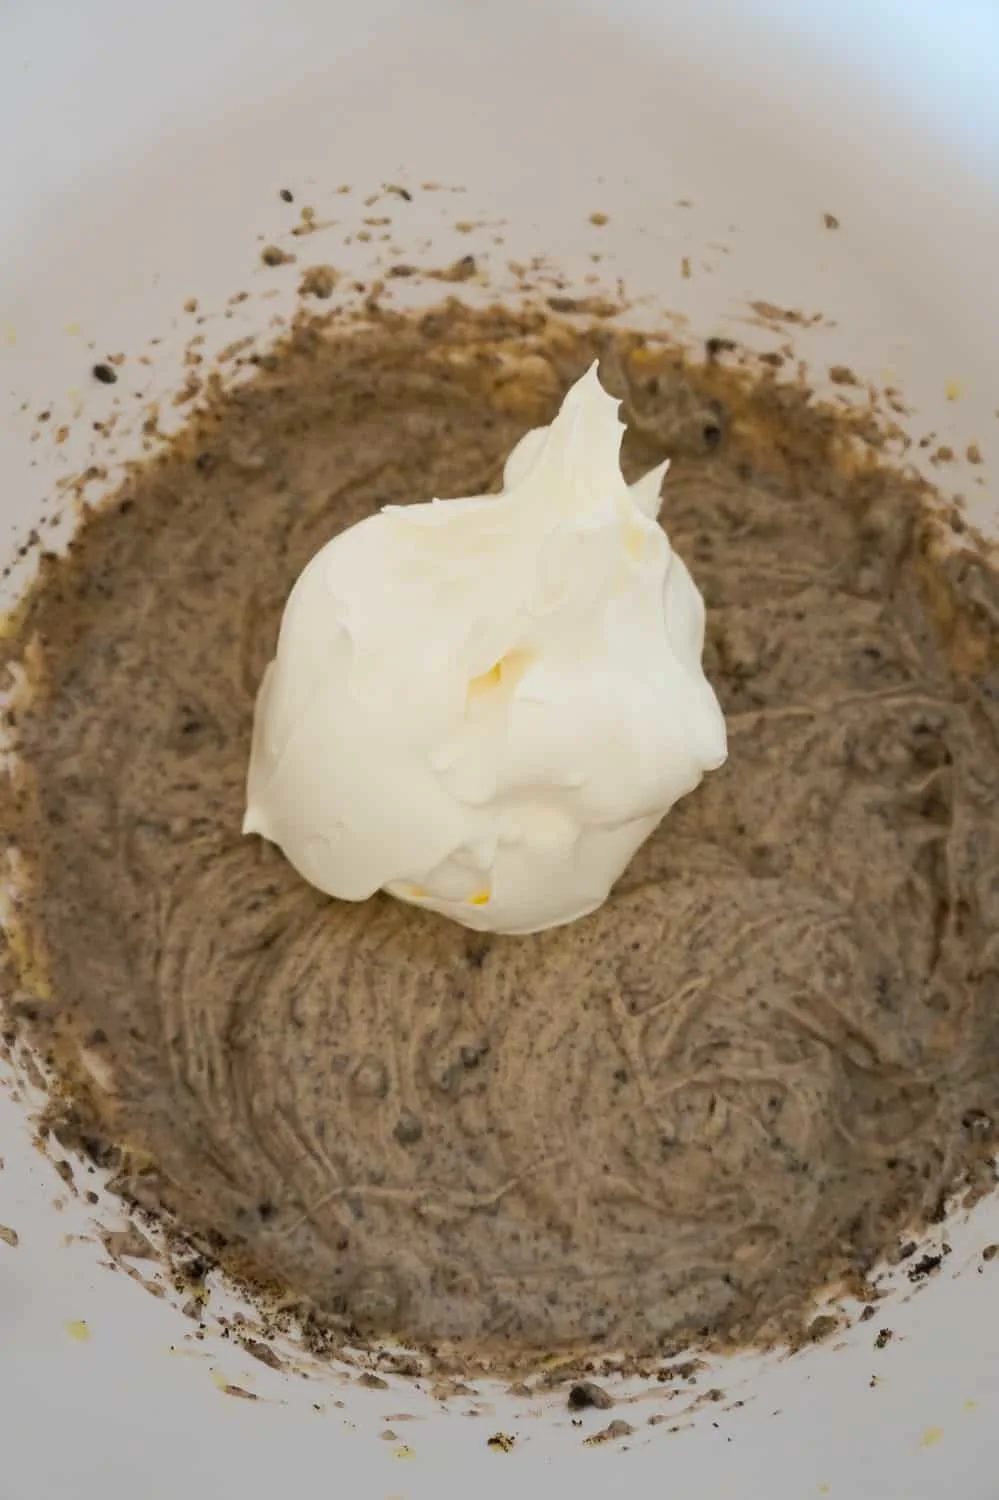 Cool Whip added to Oreo pudding mixture in a mixing bowl